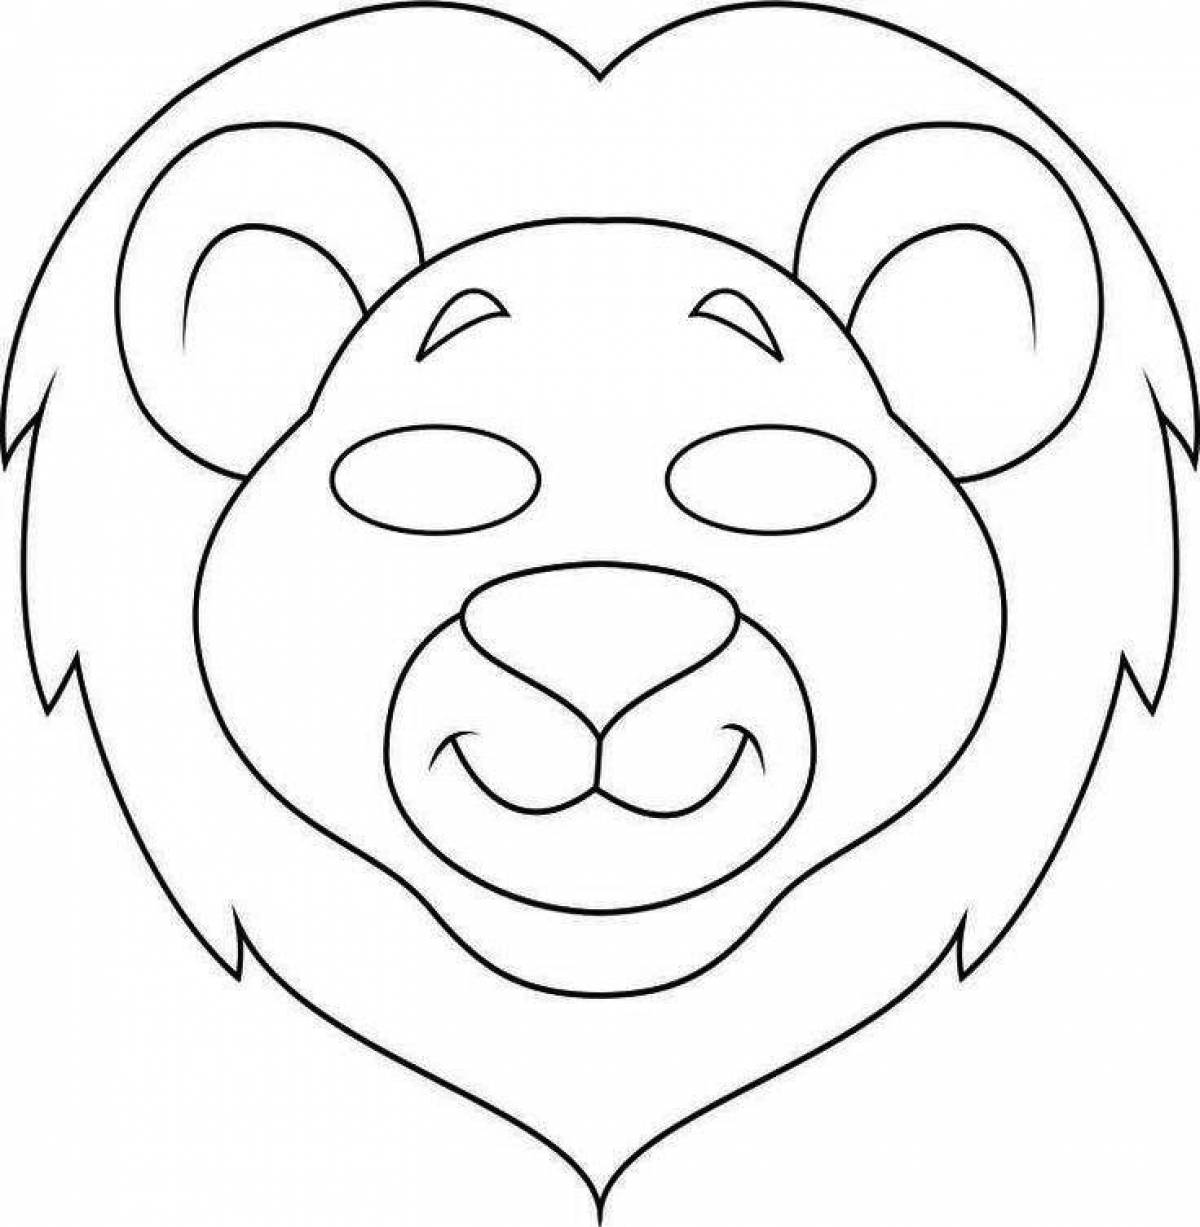 Majestic lion head coloring page